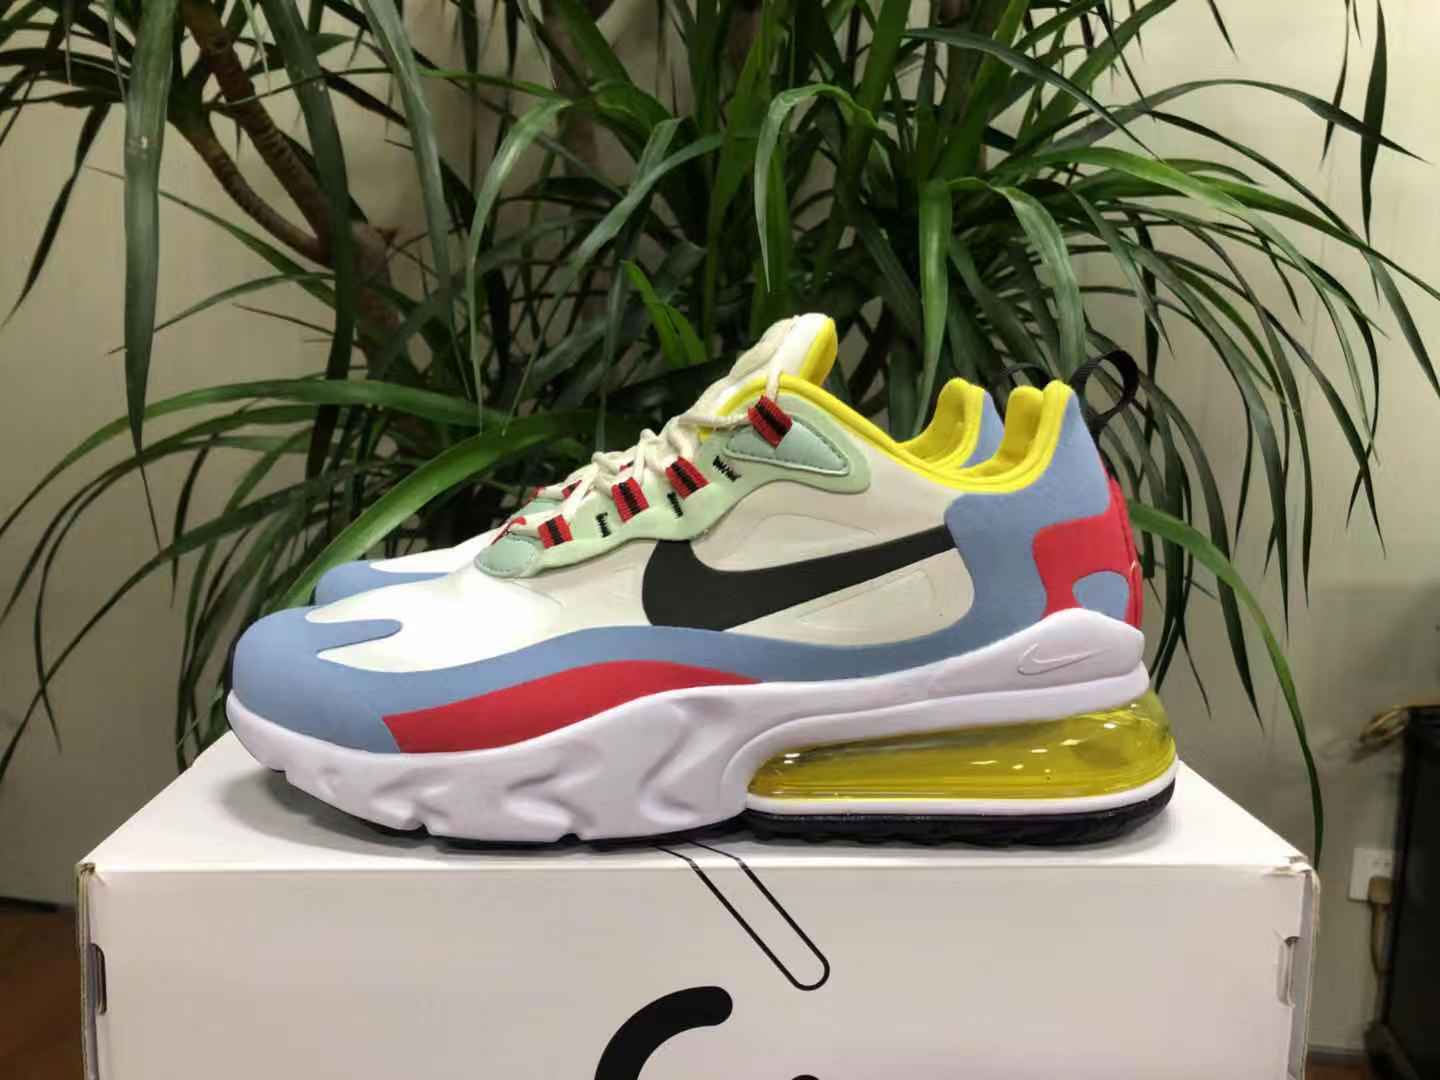 Women's Hot sale Running weapon Air Max Shoes 031